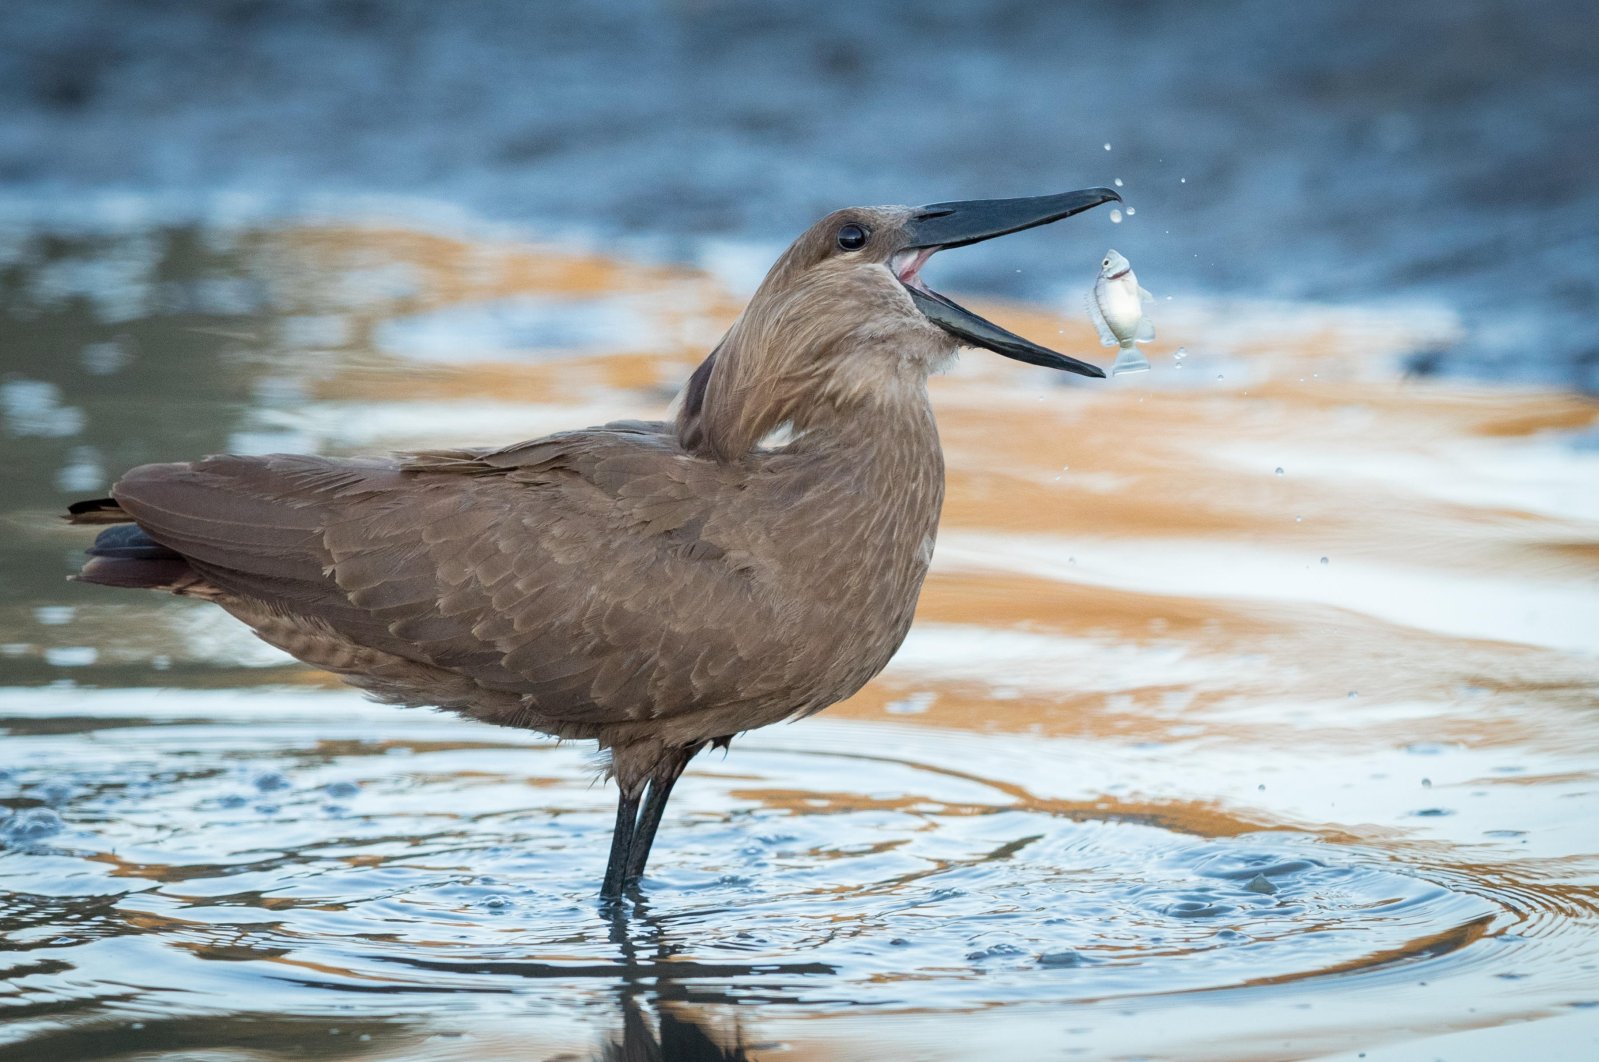 A hammerkop, also known as a hammerhead, eats a fish in the Okavango Delta of Botswana. (Reuters File Photo)